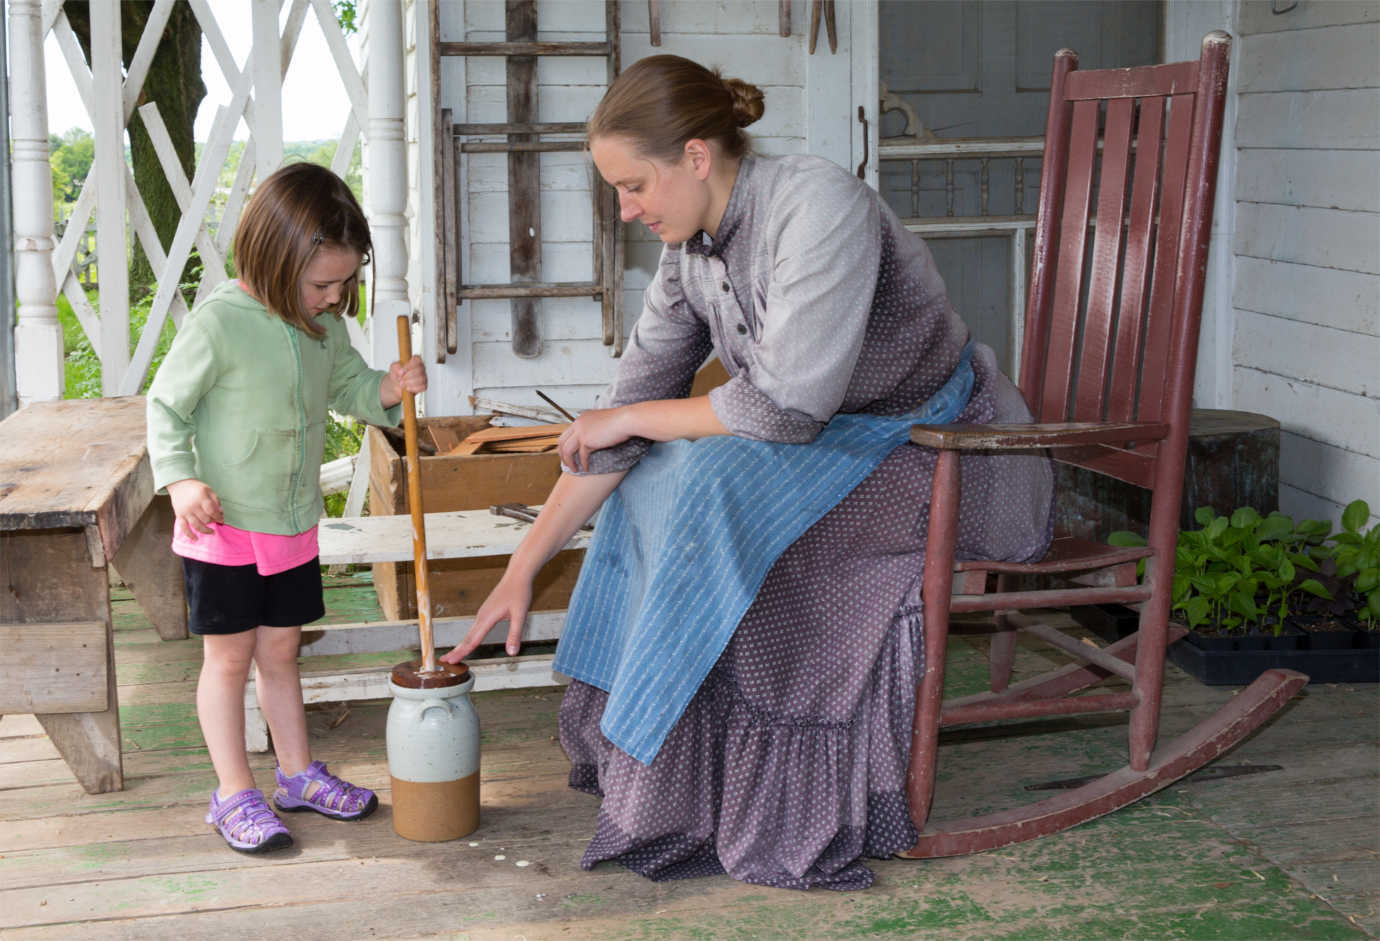 At Living History Farms, visitors can take part in traditional farm chores such as spinning wool and churning butter.  Image courtesy of Living History Farms.